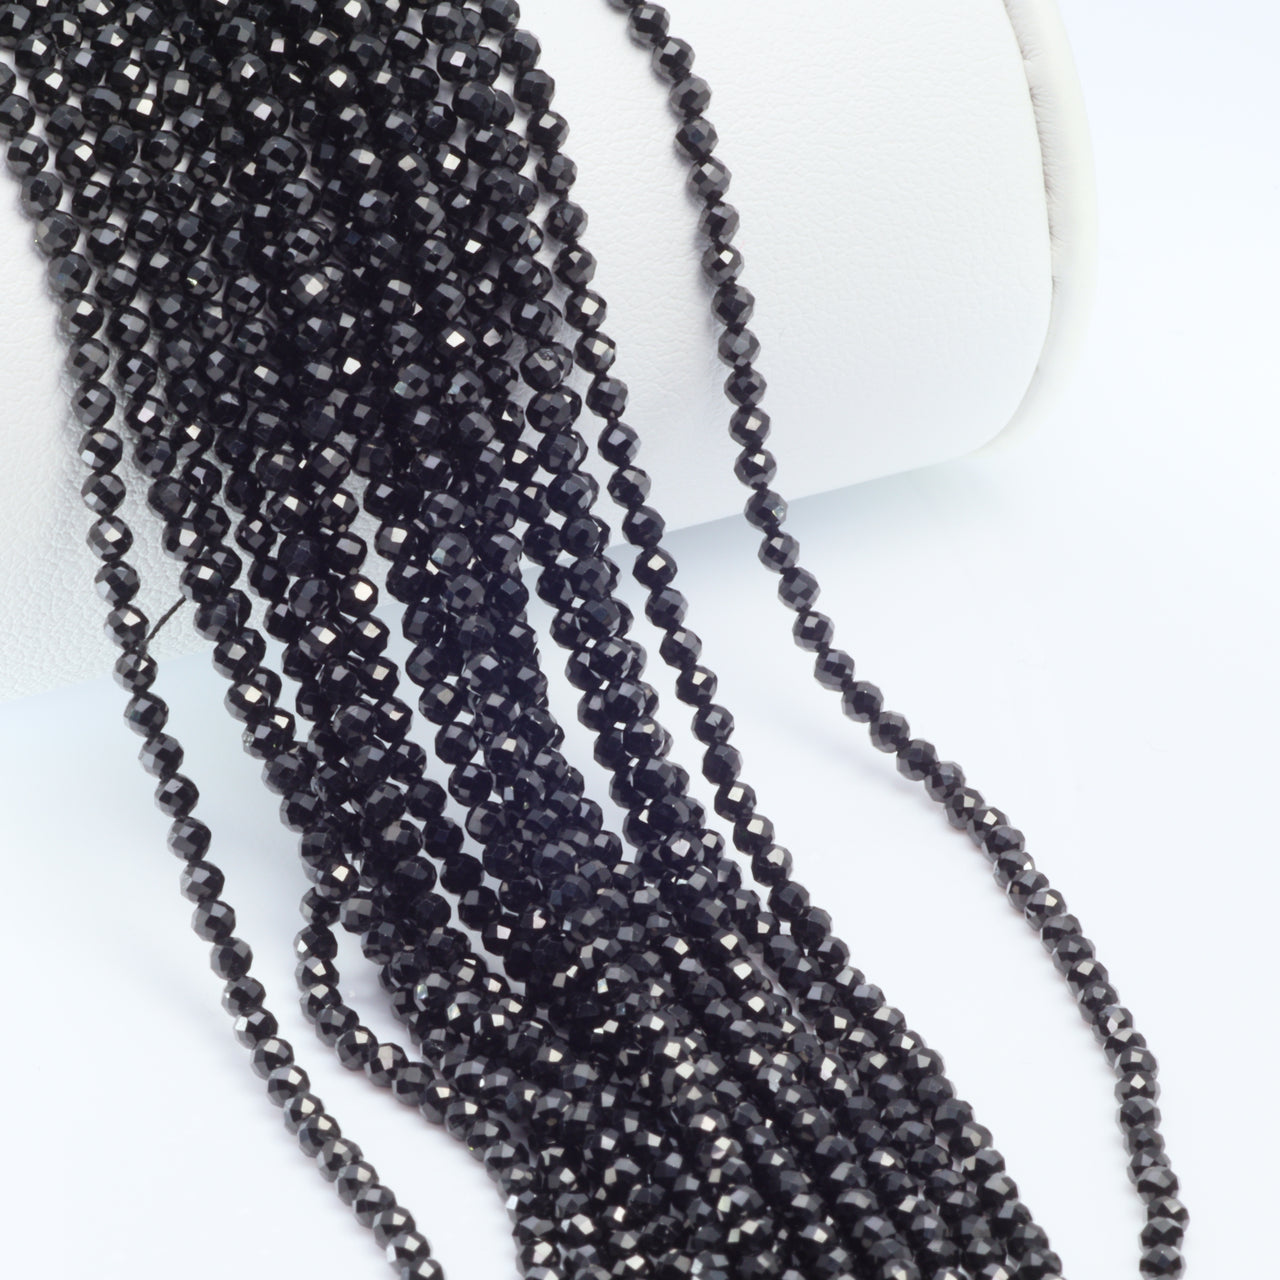 Black Spinel 2.5mm Faceted Rounds